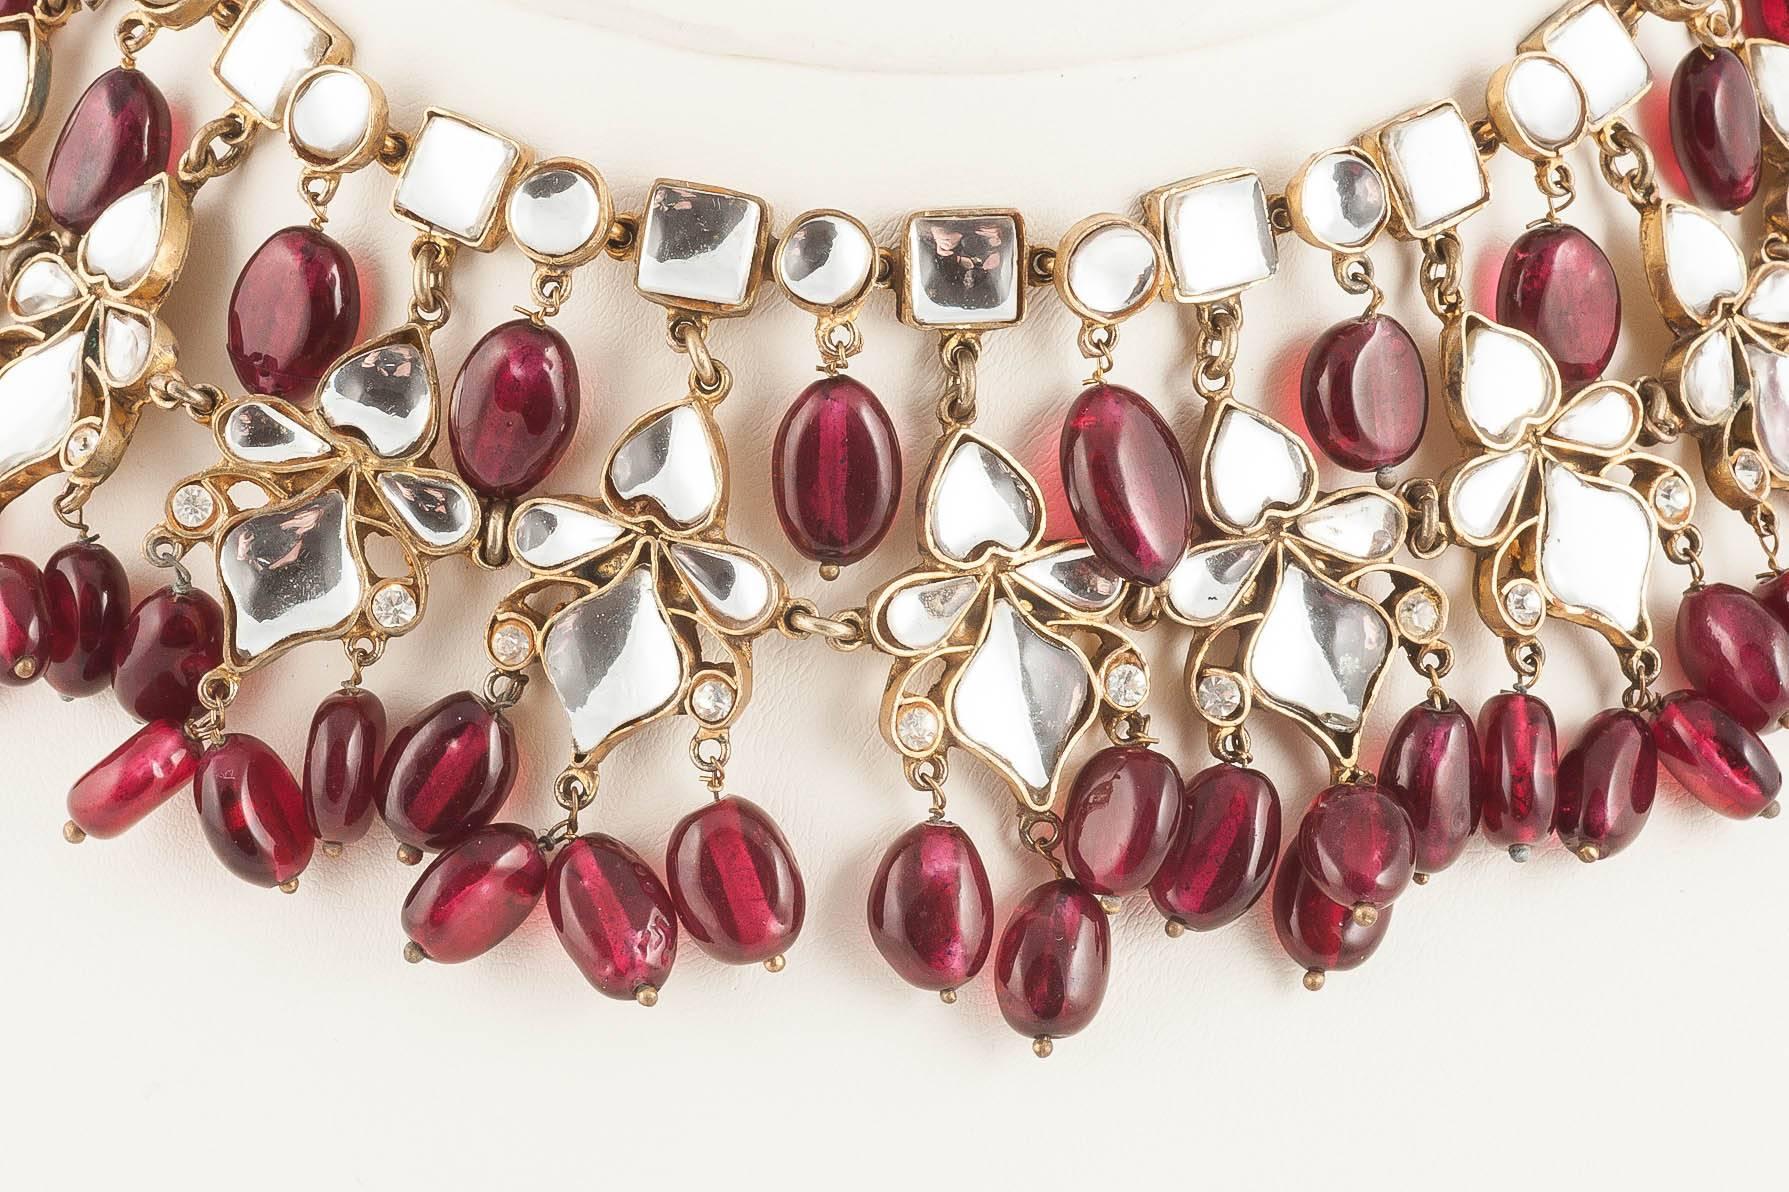 Composed of rich ruby oval glass beads, and clear mirrored glass pieces , this necklace reflects Kenneth Jay Lane's passion for India, and his collections of Indian inspired jewellery. As always with his designs, they are full of a glamour and